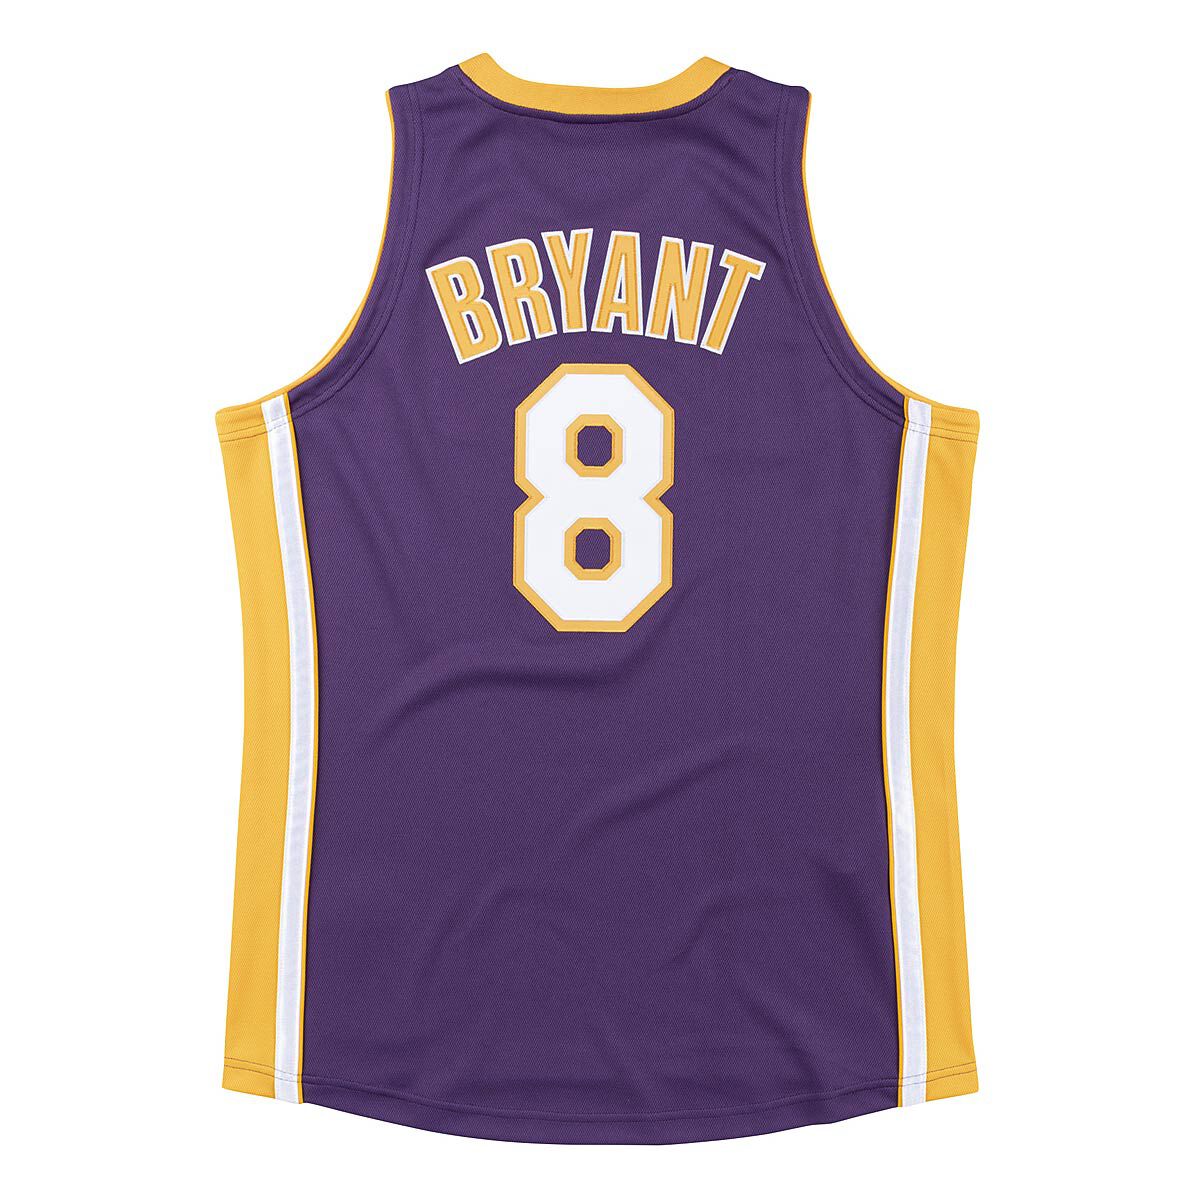 NBA LOS ANGELES LAKERS AUTHENTIC JERSEY KOBE BRYANT #8 '08-'09